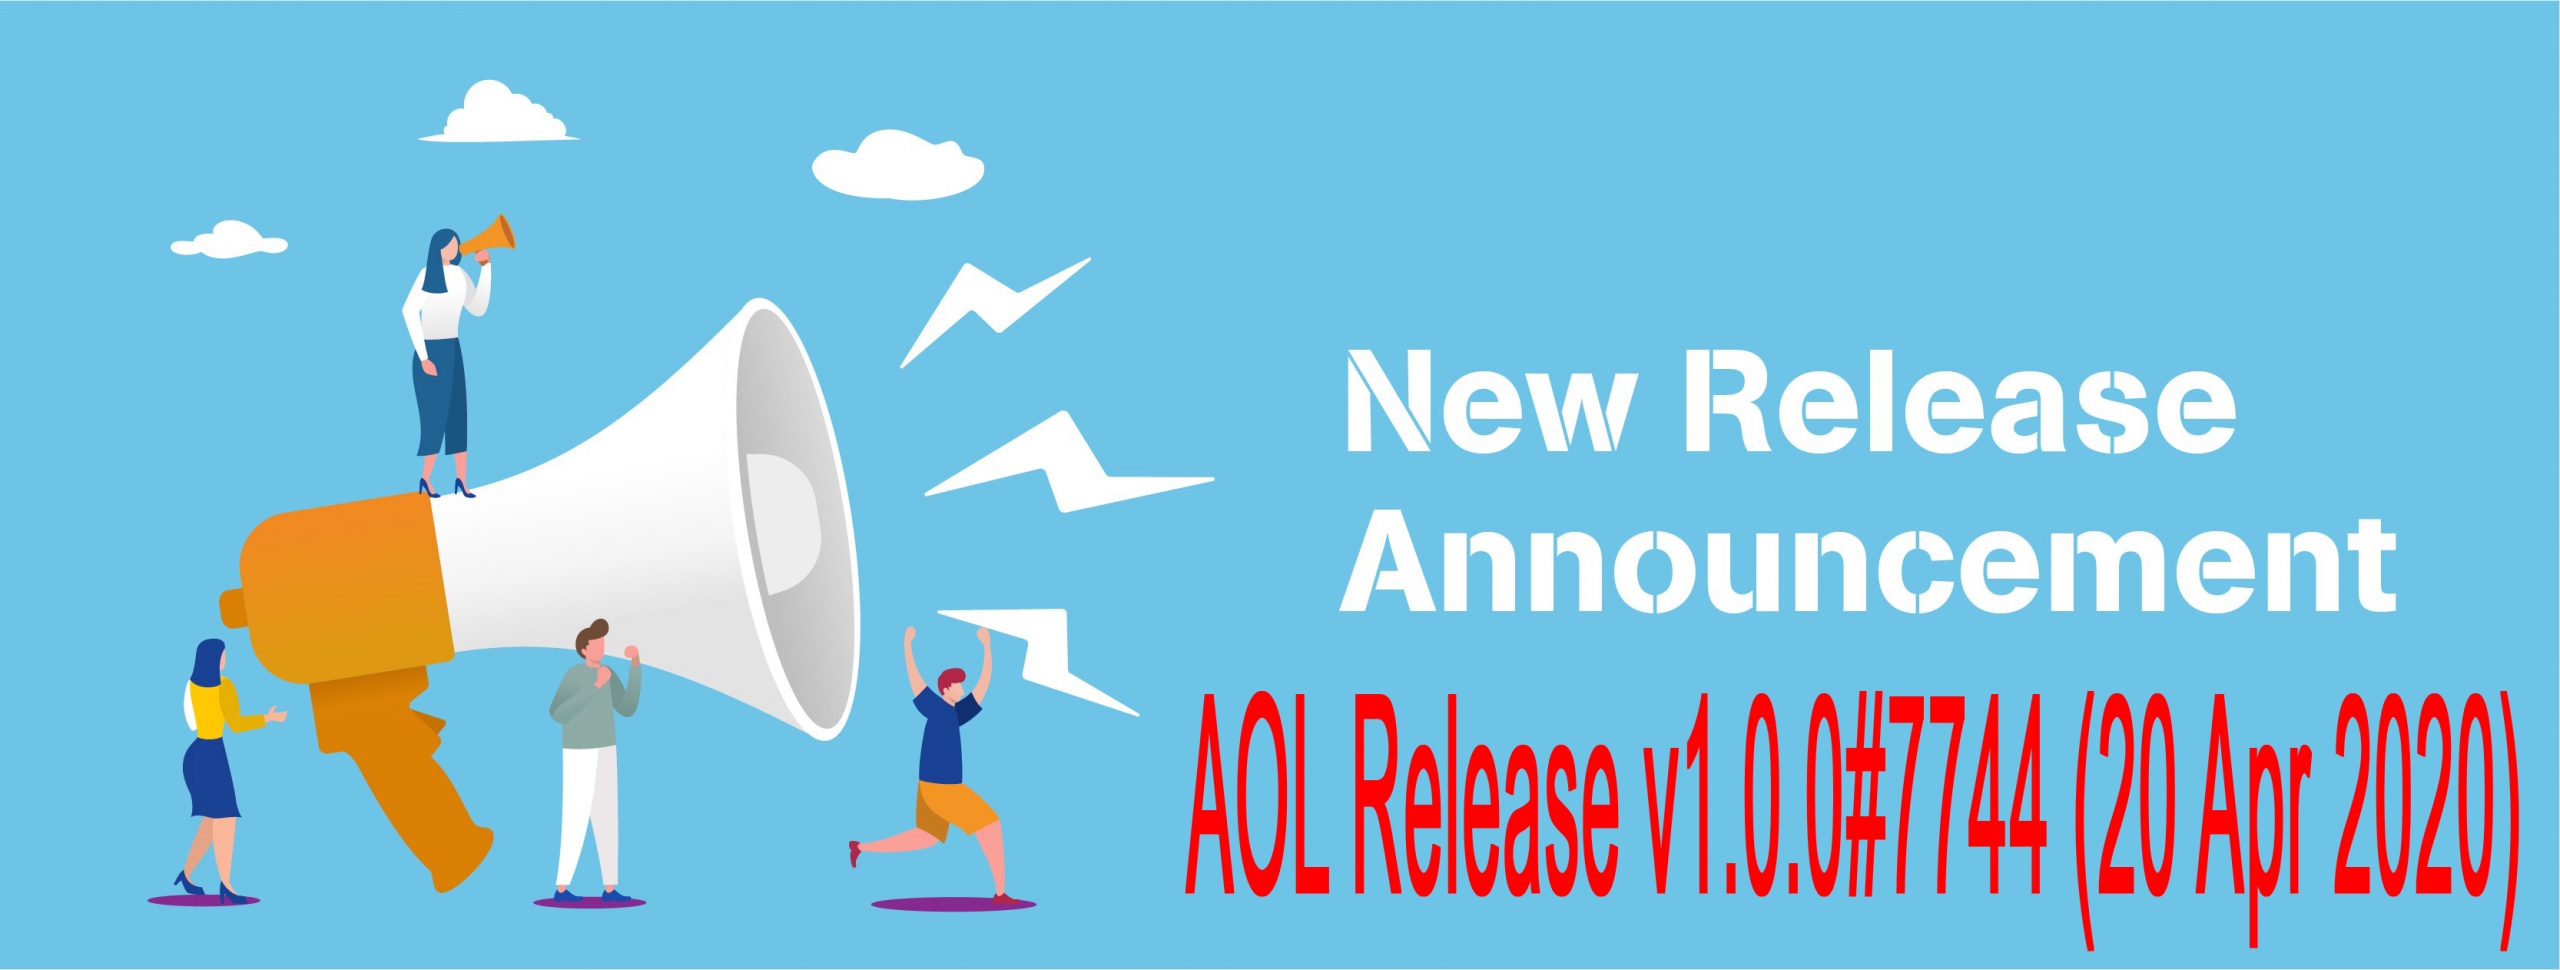 Accurate Online Release v1.0.0#7744 (20 Apr 2020)